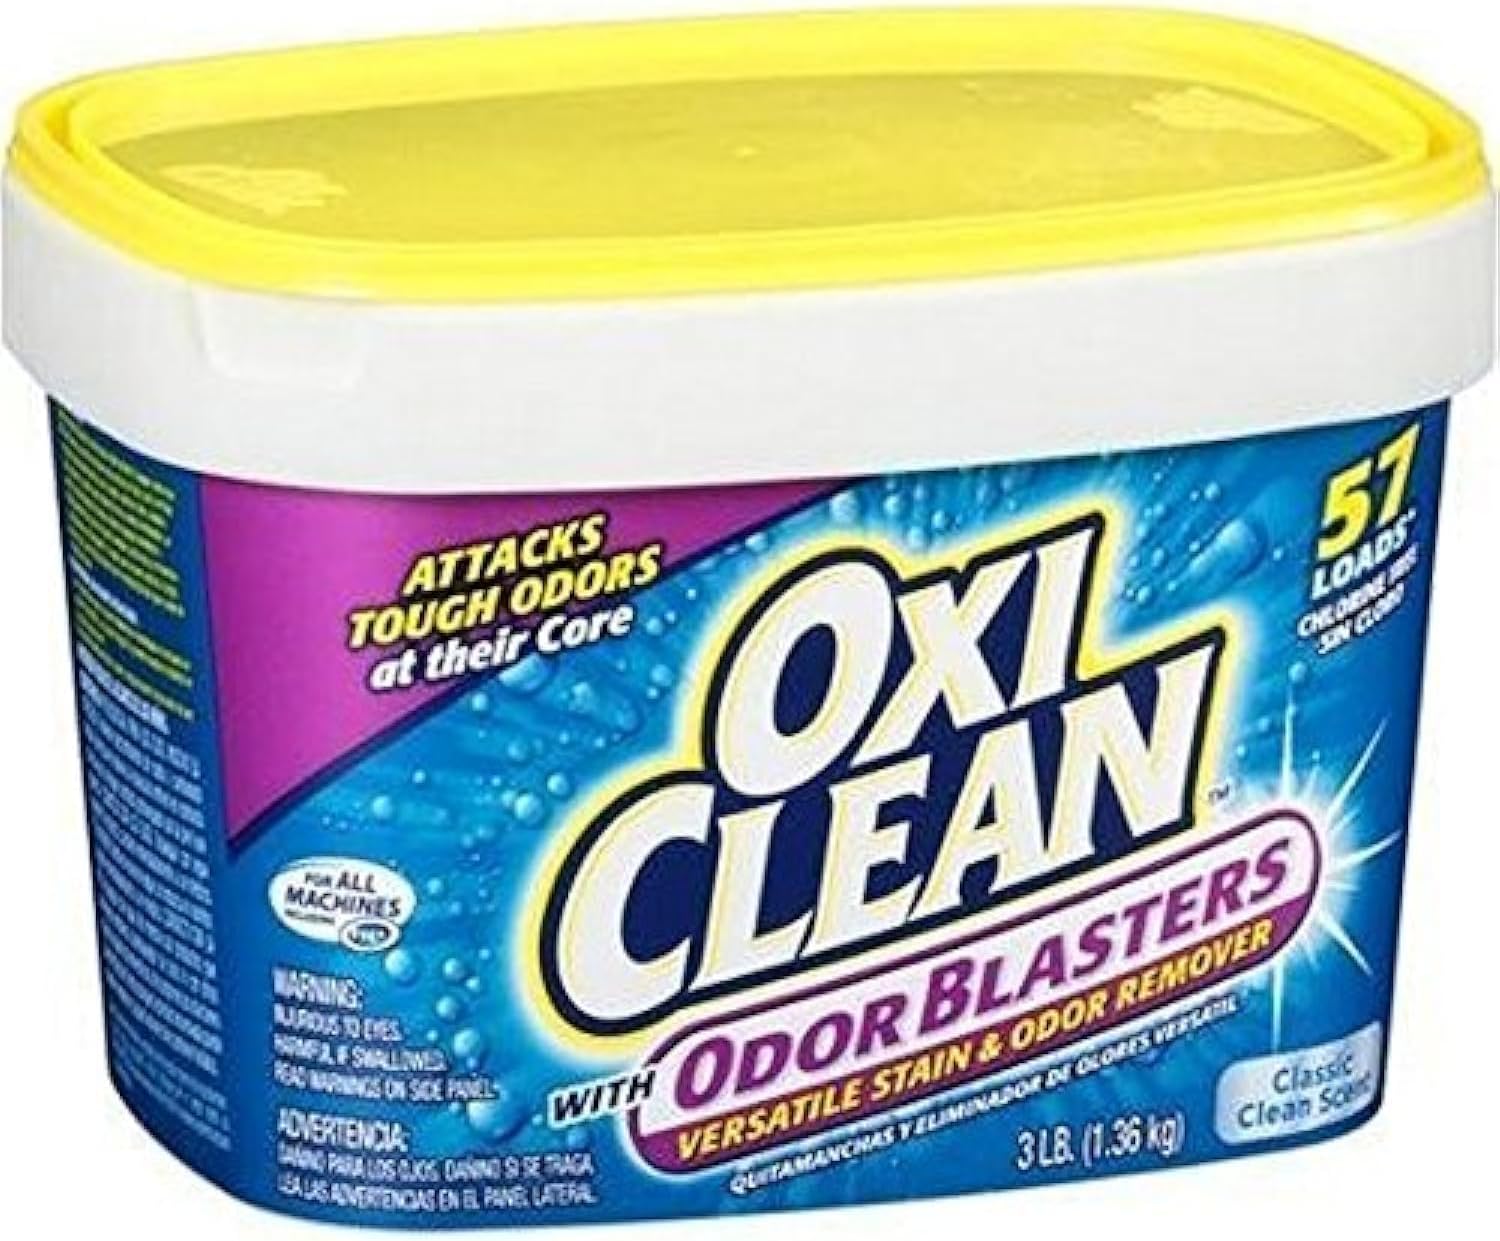 OxiClean with Odor Blasters Classic Clean Scent Versatile Stain and Odor Remover, 3 lb. : Health & Household